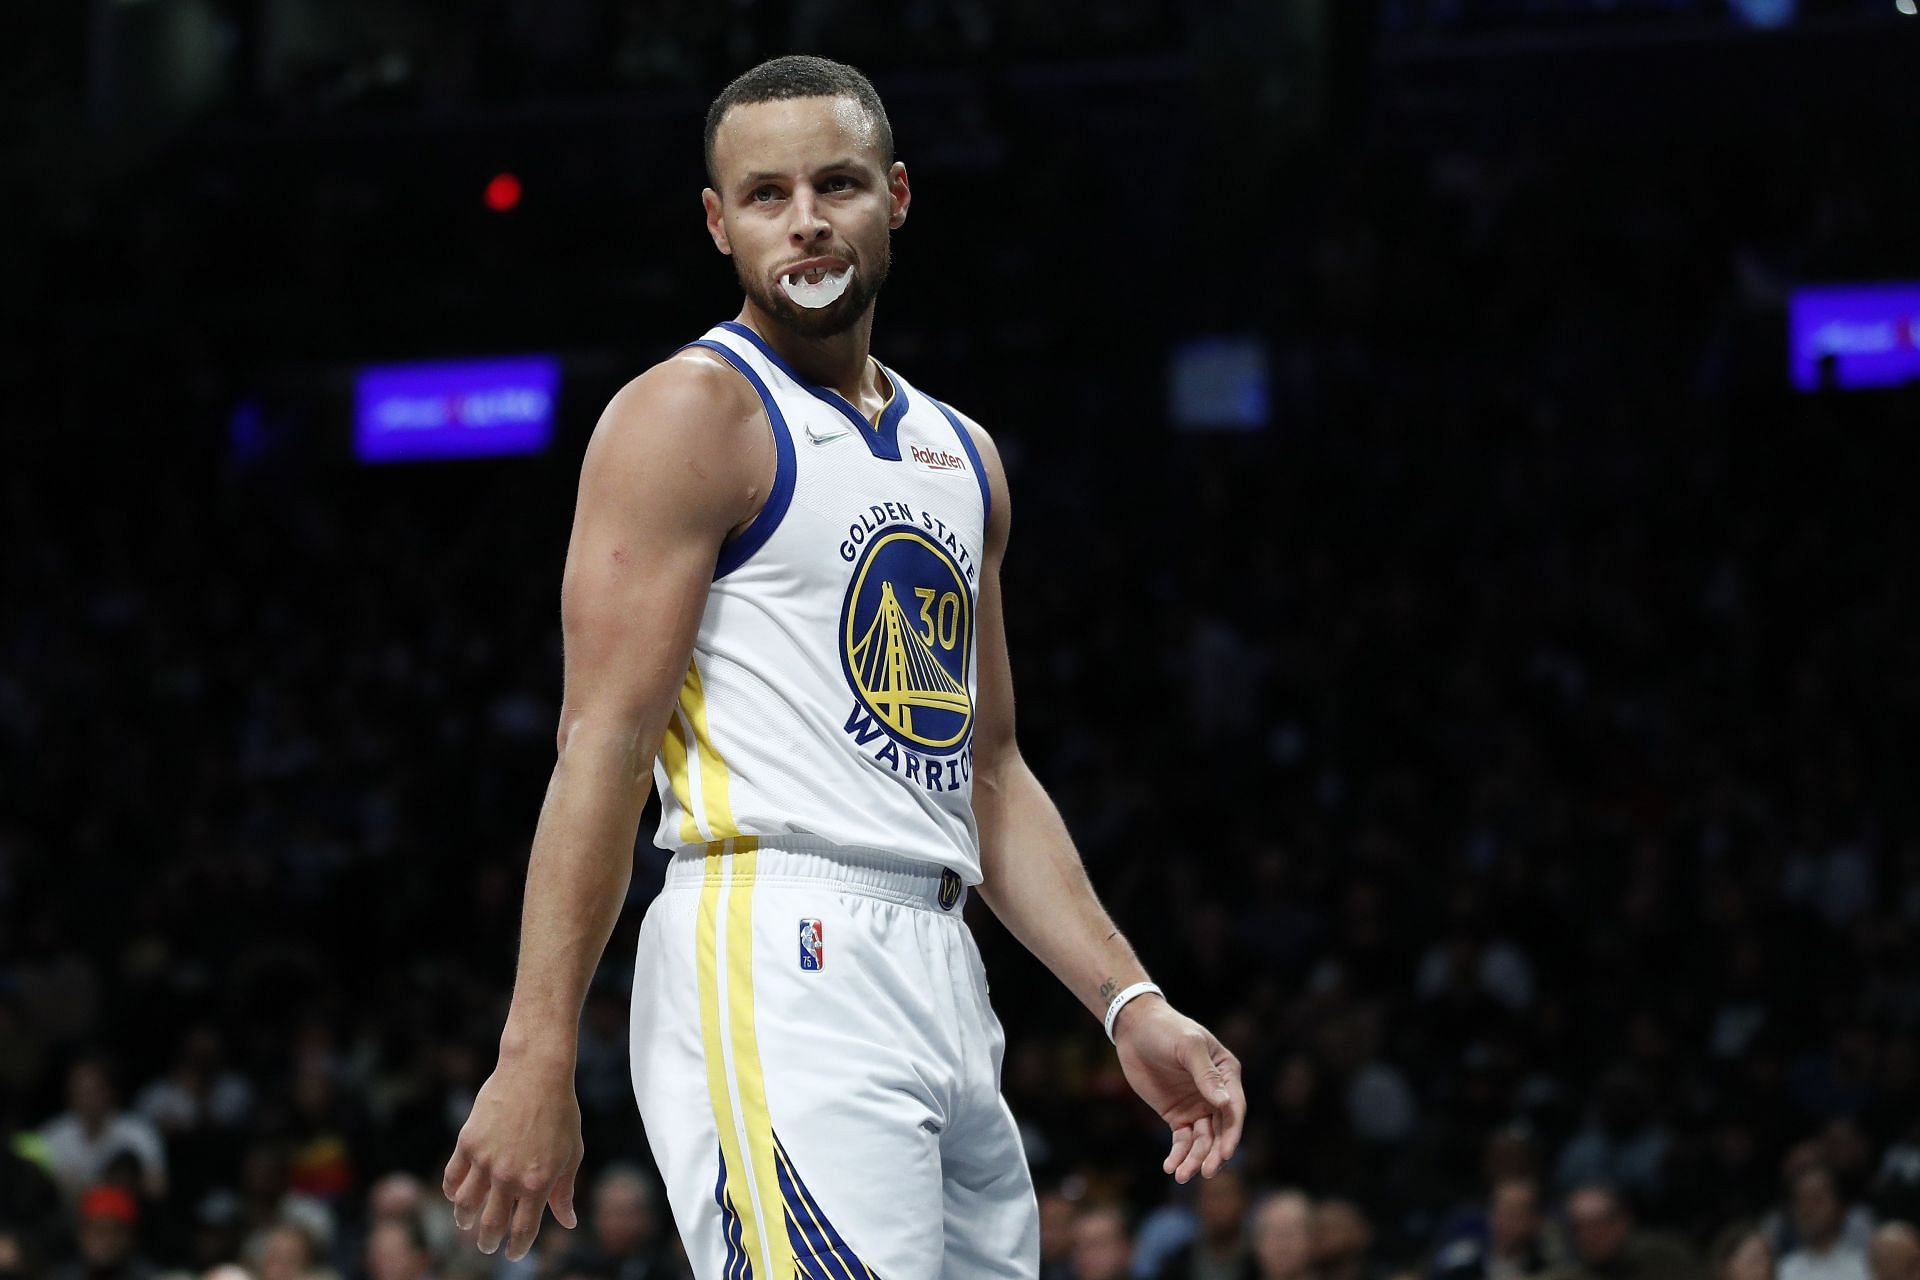 Stephen Curry has the Golden State Warriors at the top of the NBA standings